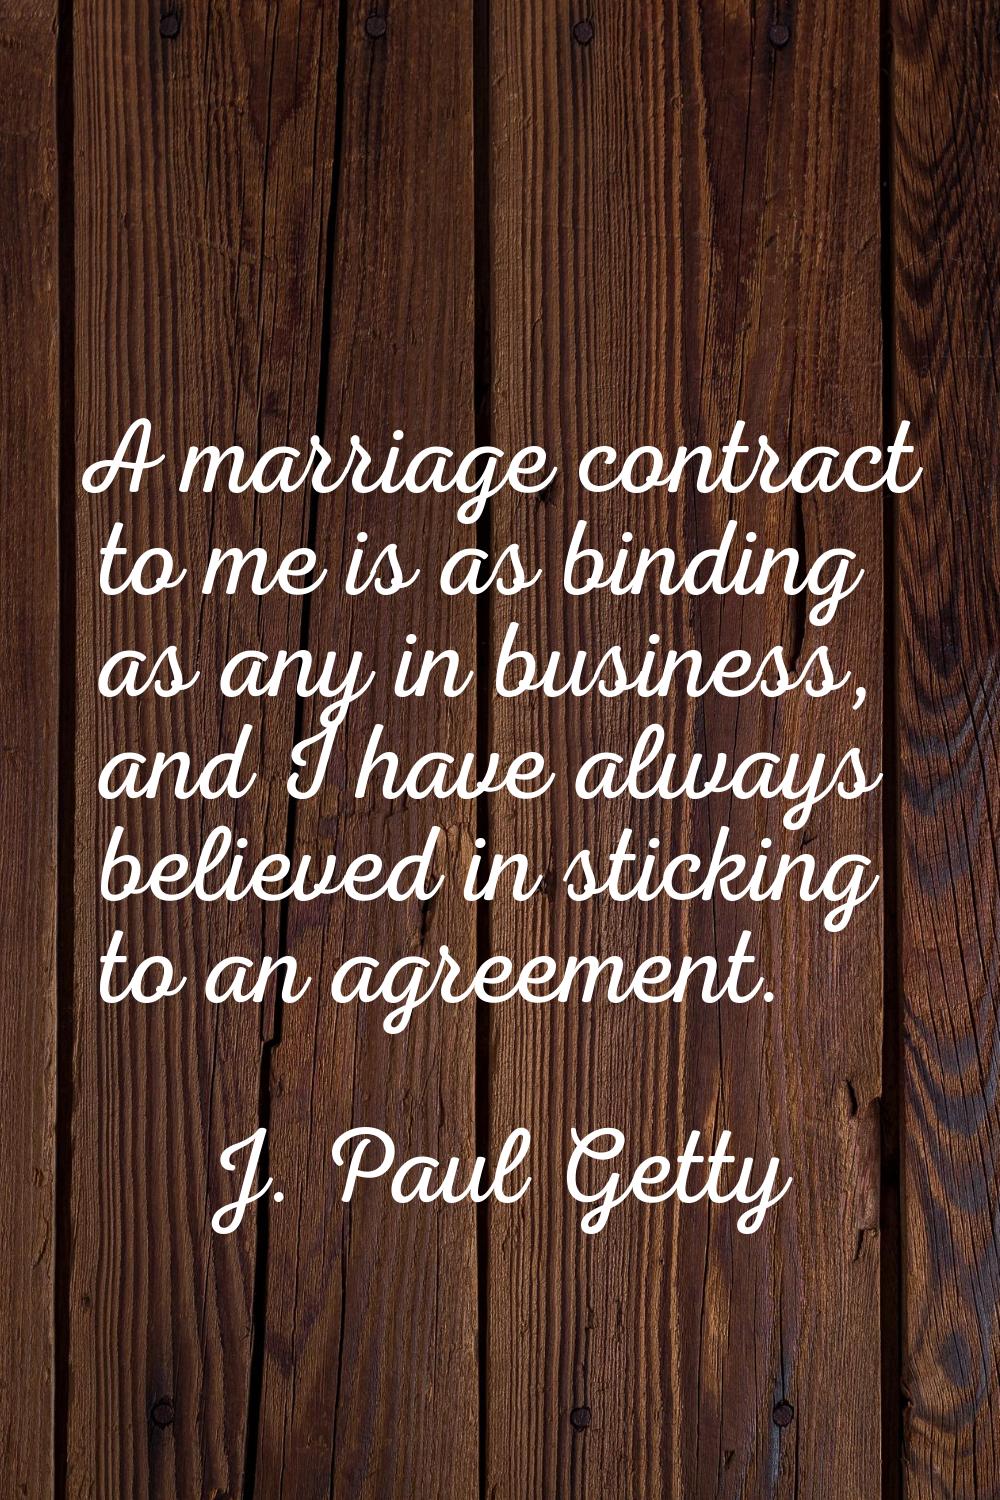 A marriage contract to me is as binding as any in business, and I have always believed in sticking 